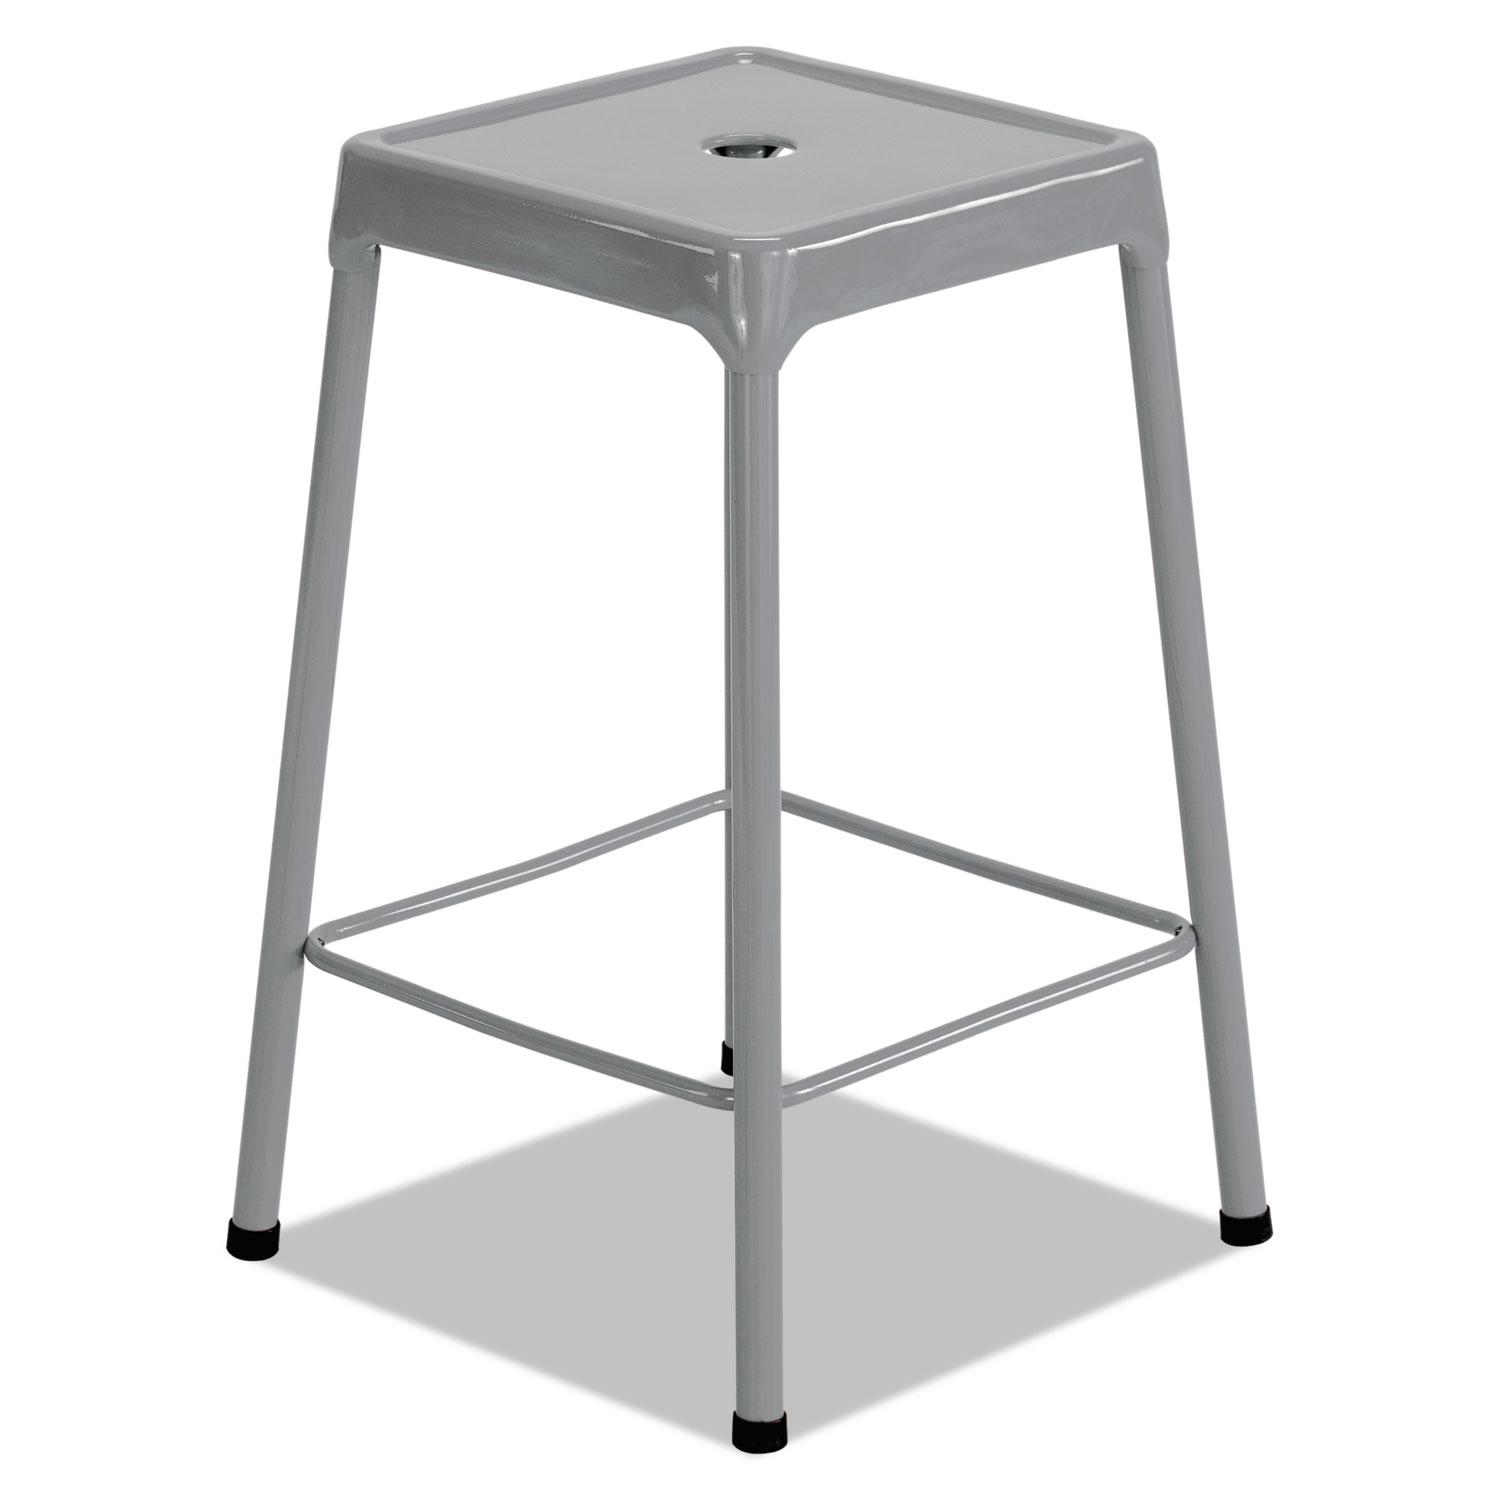  Safco 6605SL Counter-Height Steel Stool, 25 Seat Height, Supports up to 250 lbs., Silver Seat/Silver Back, Silver Base (SAF6605SL) 